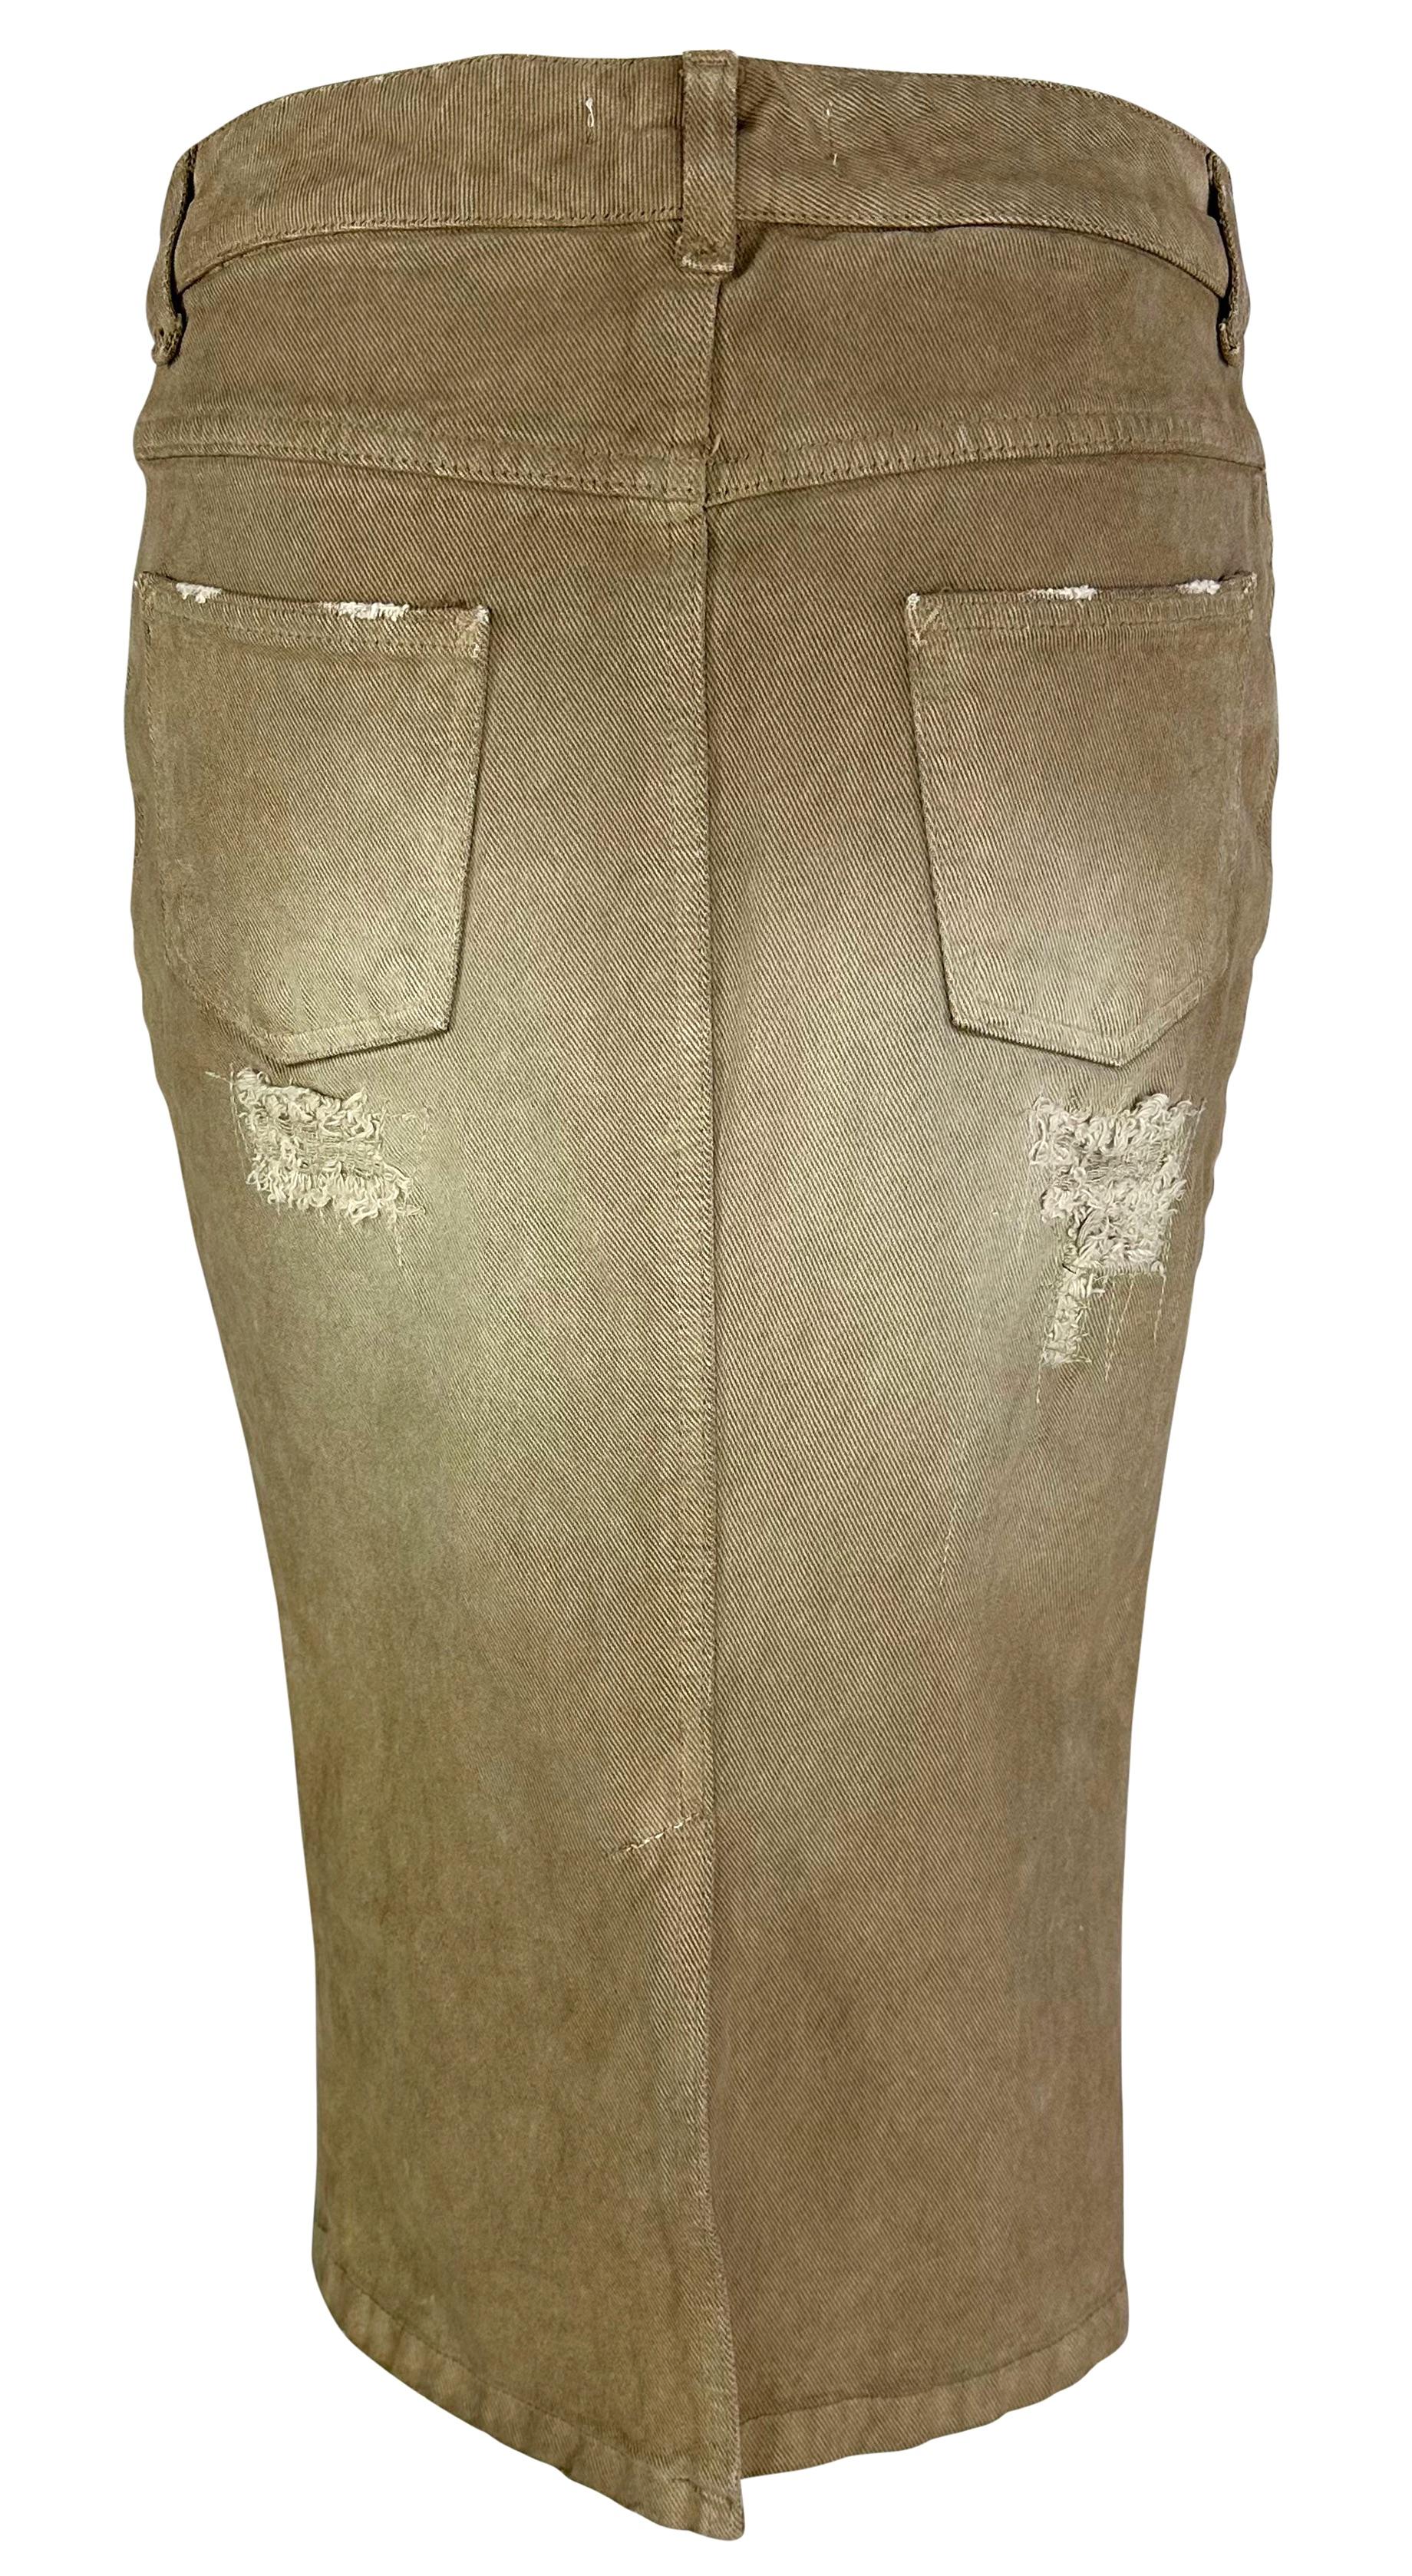 NWT Early 2000s Dolce & Gabbana Distressed Tan Denim Mid-Length Skirt For Sale 1